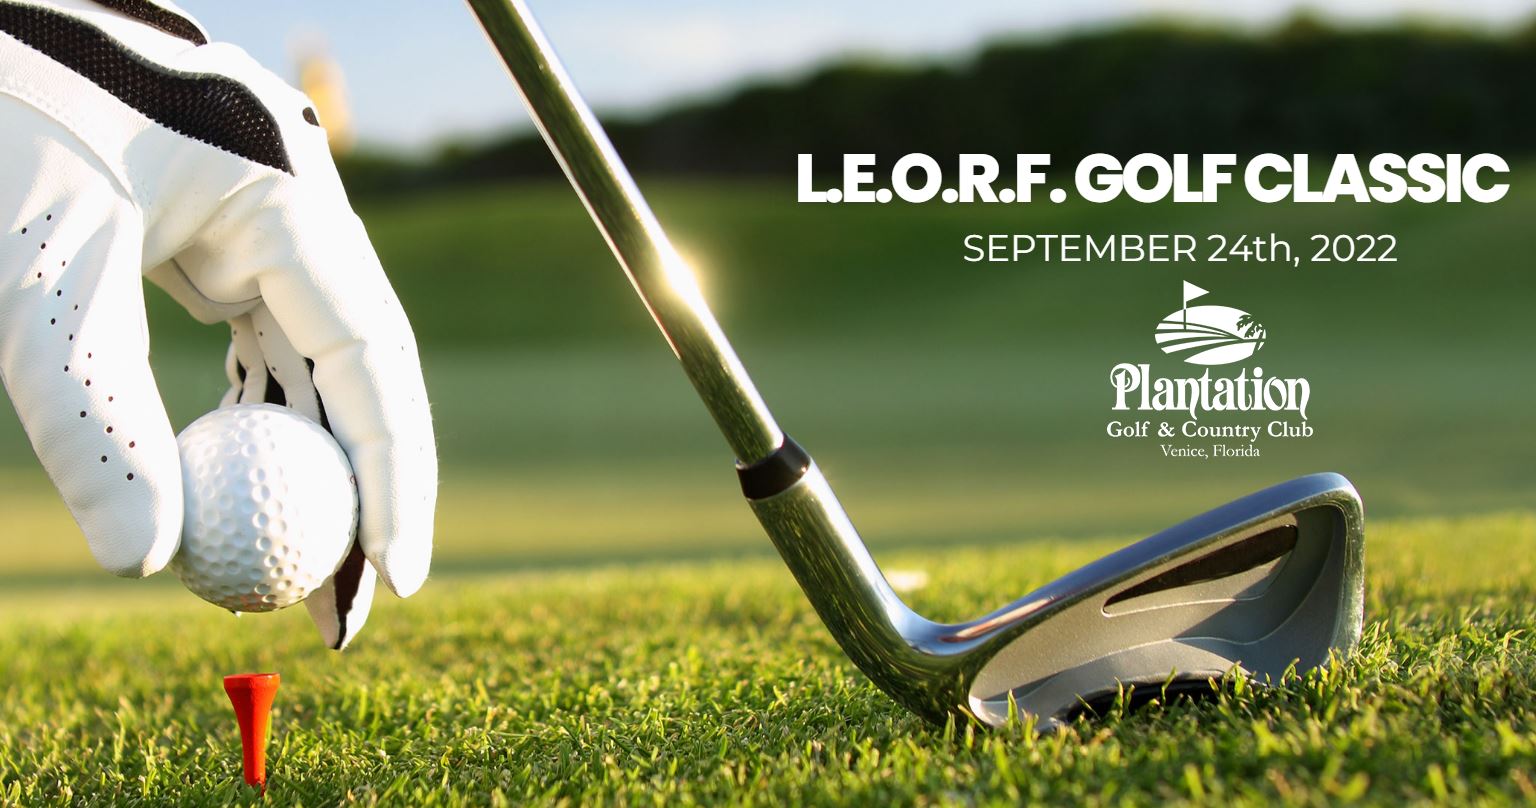 Sign up NOW for the LEORF Golf Classic to Support LEOs and their Families!